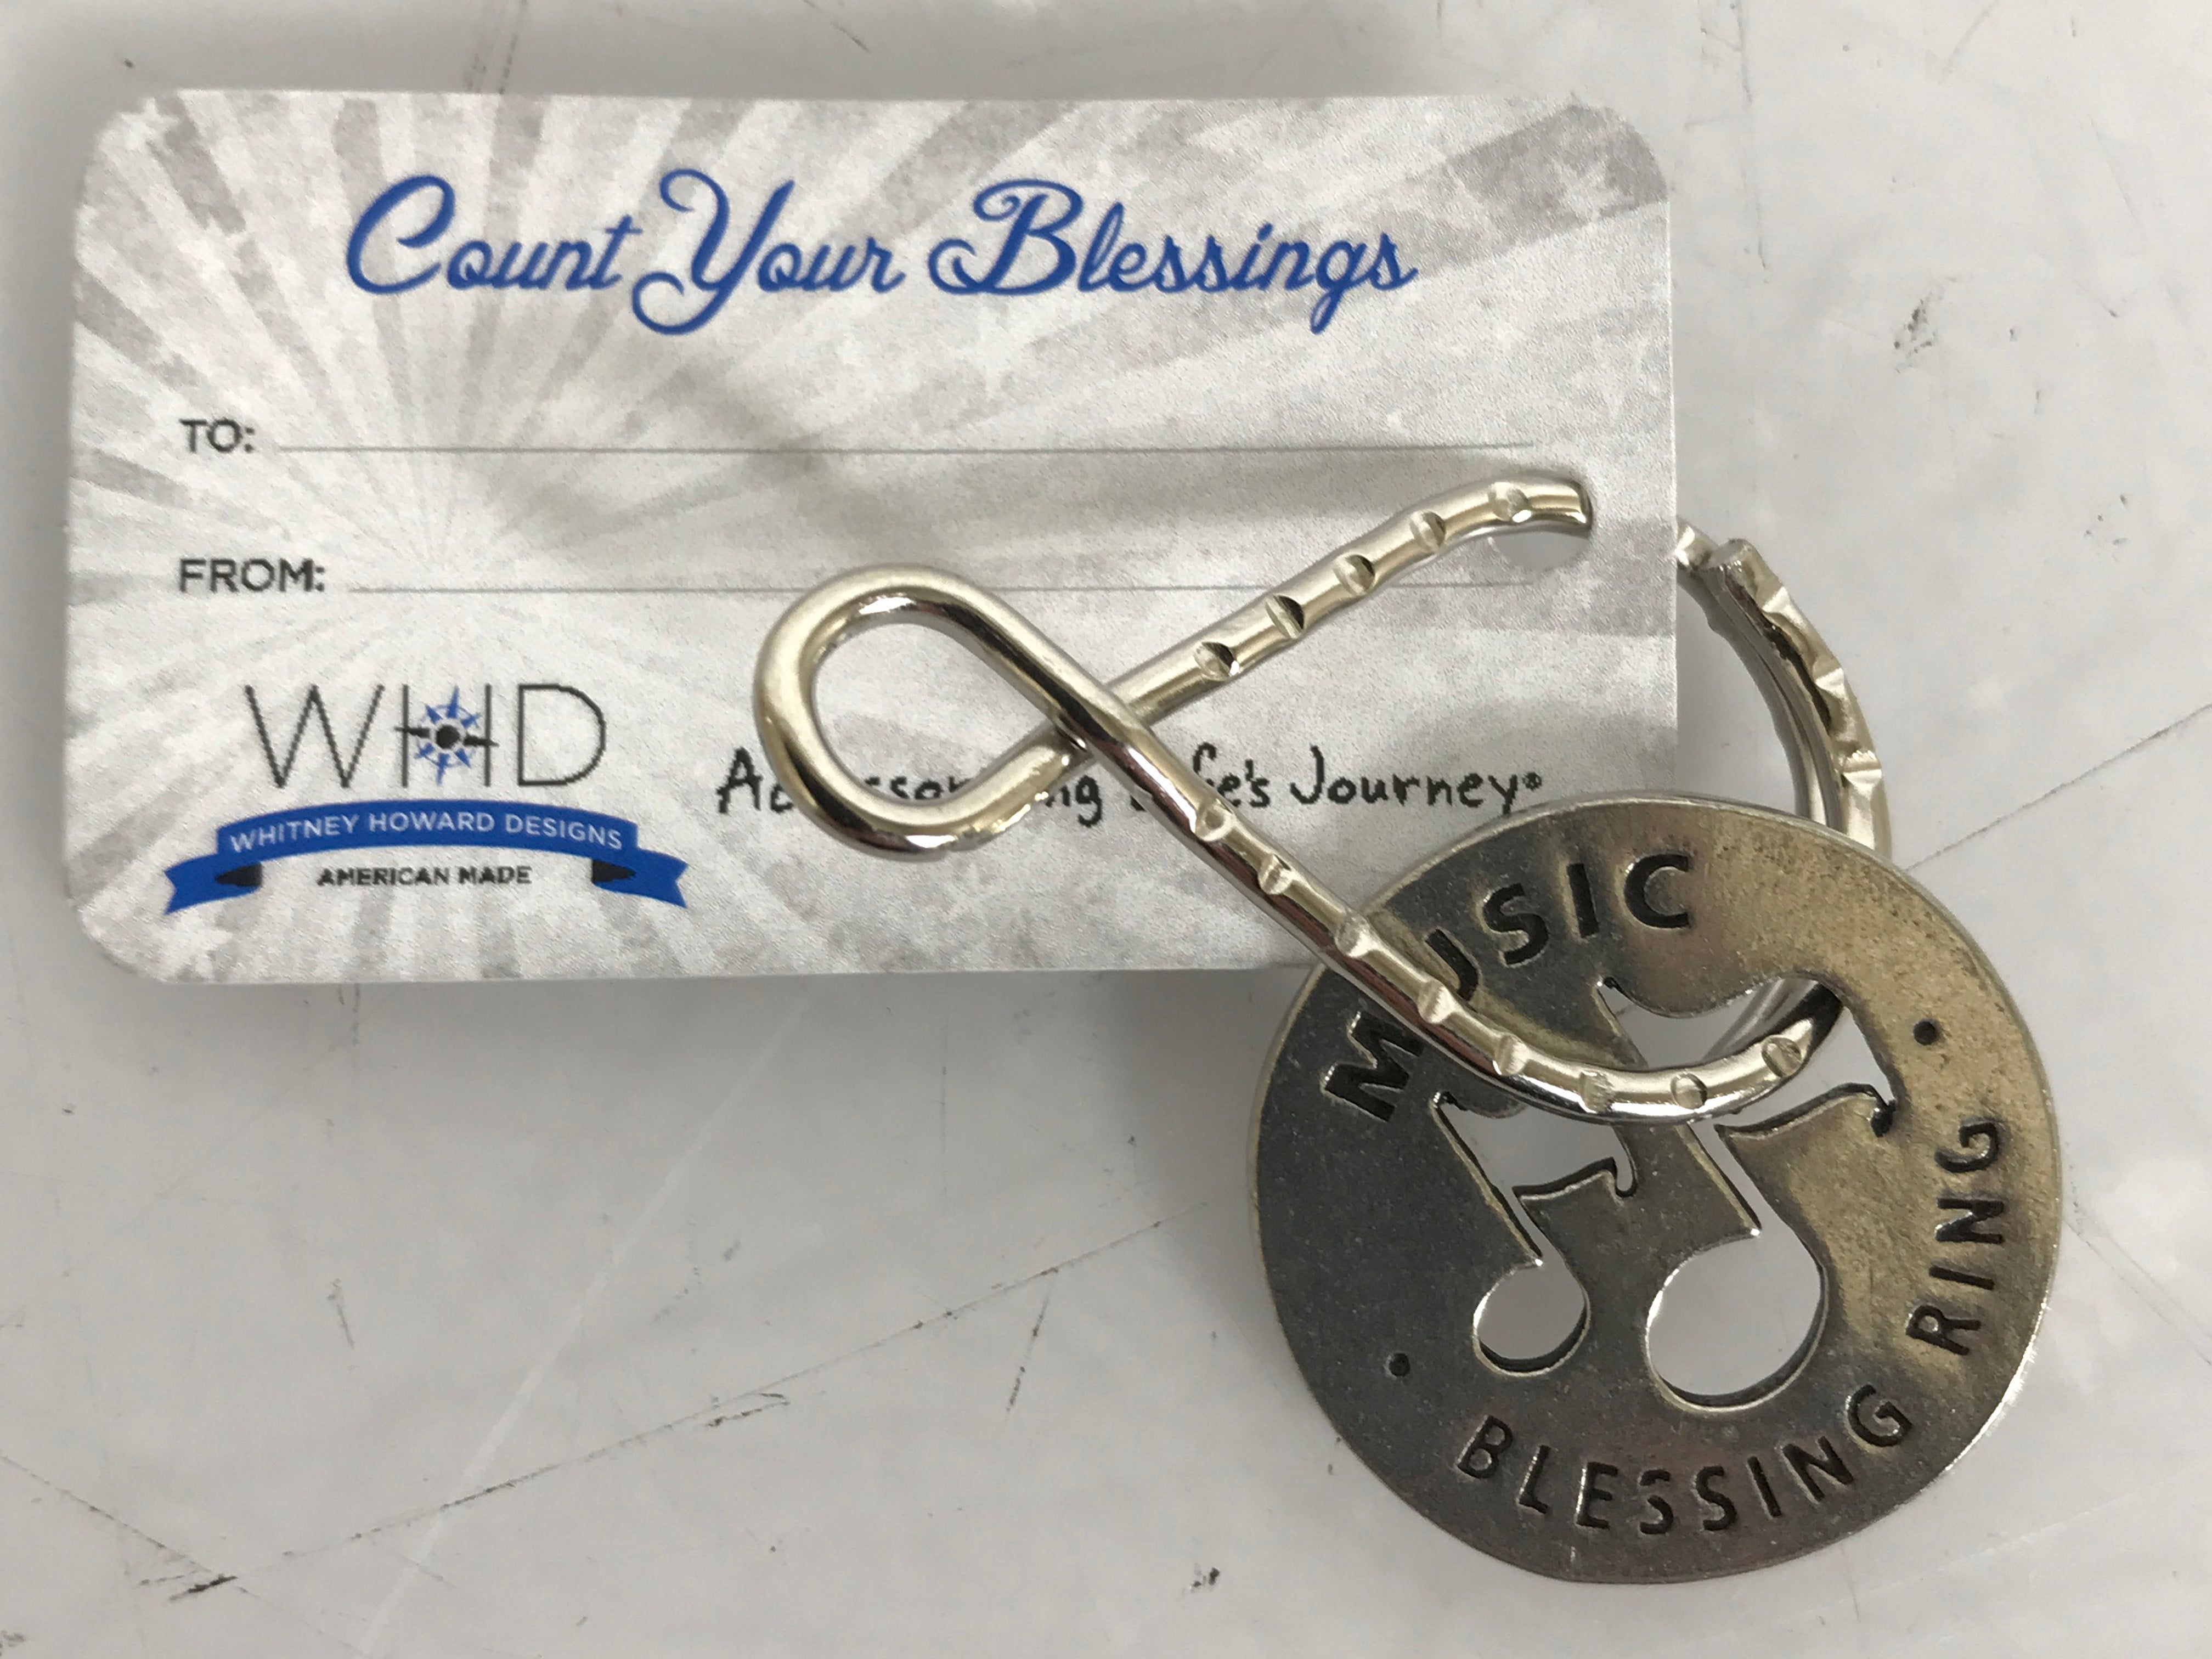 WHD BlessingRings "Music" Keychain